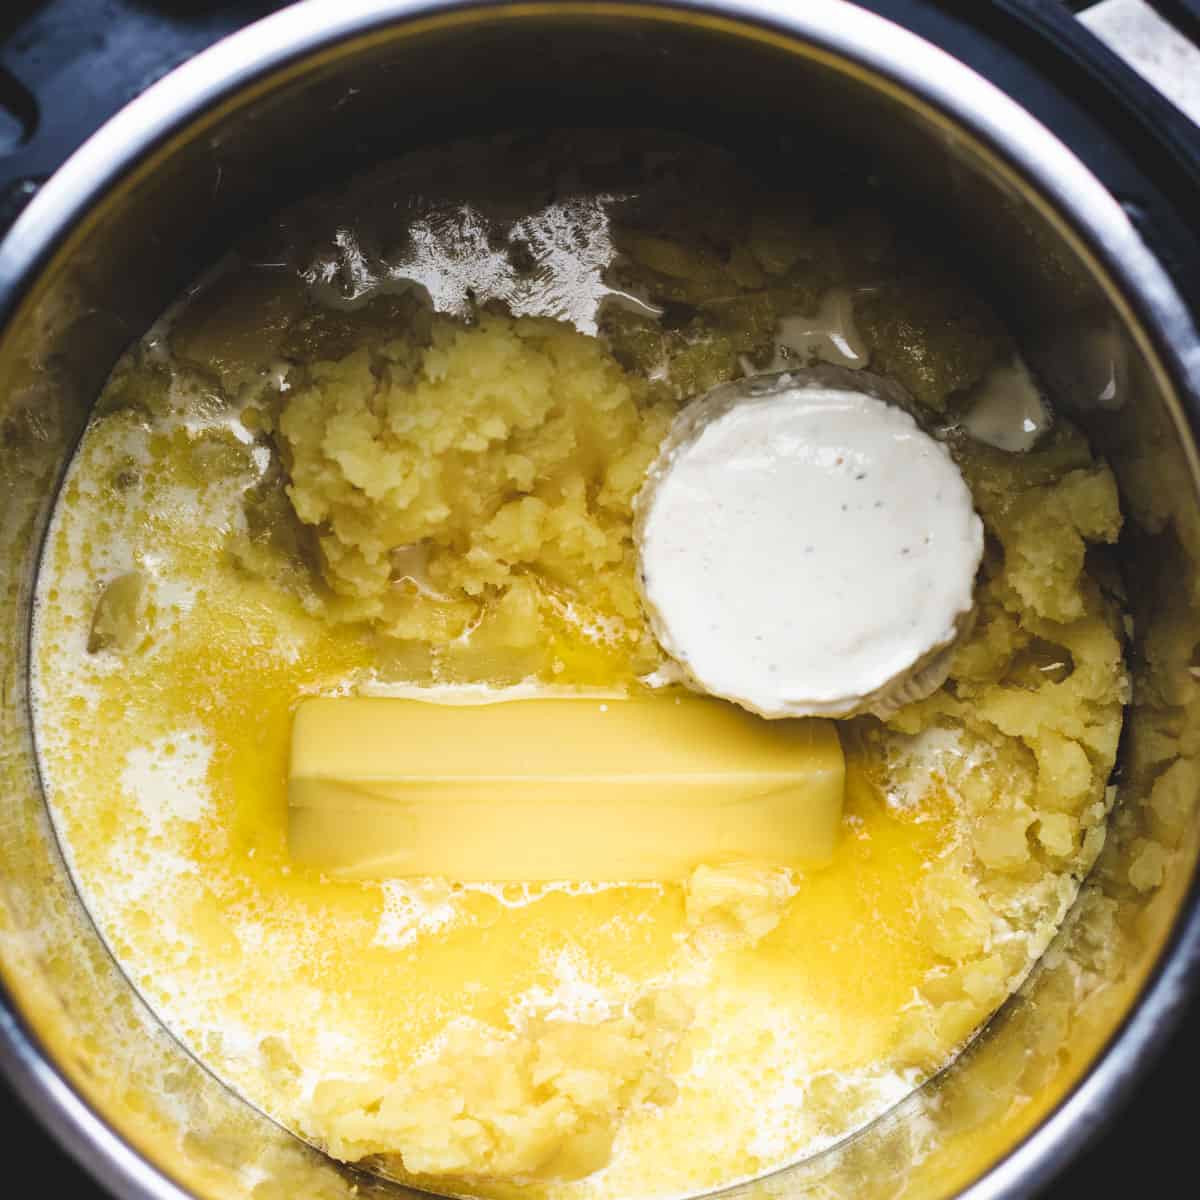 Mixing Boursin cheese into the mashed potatoes.